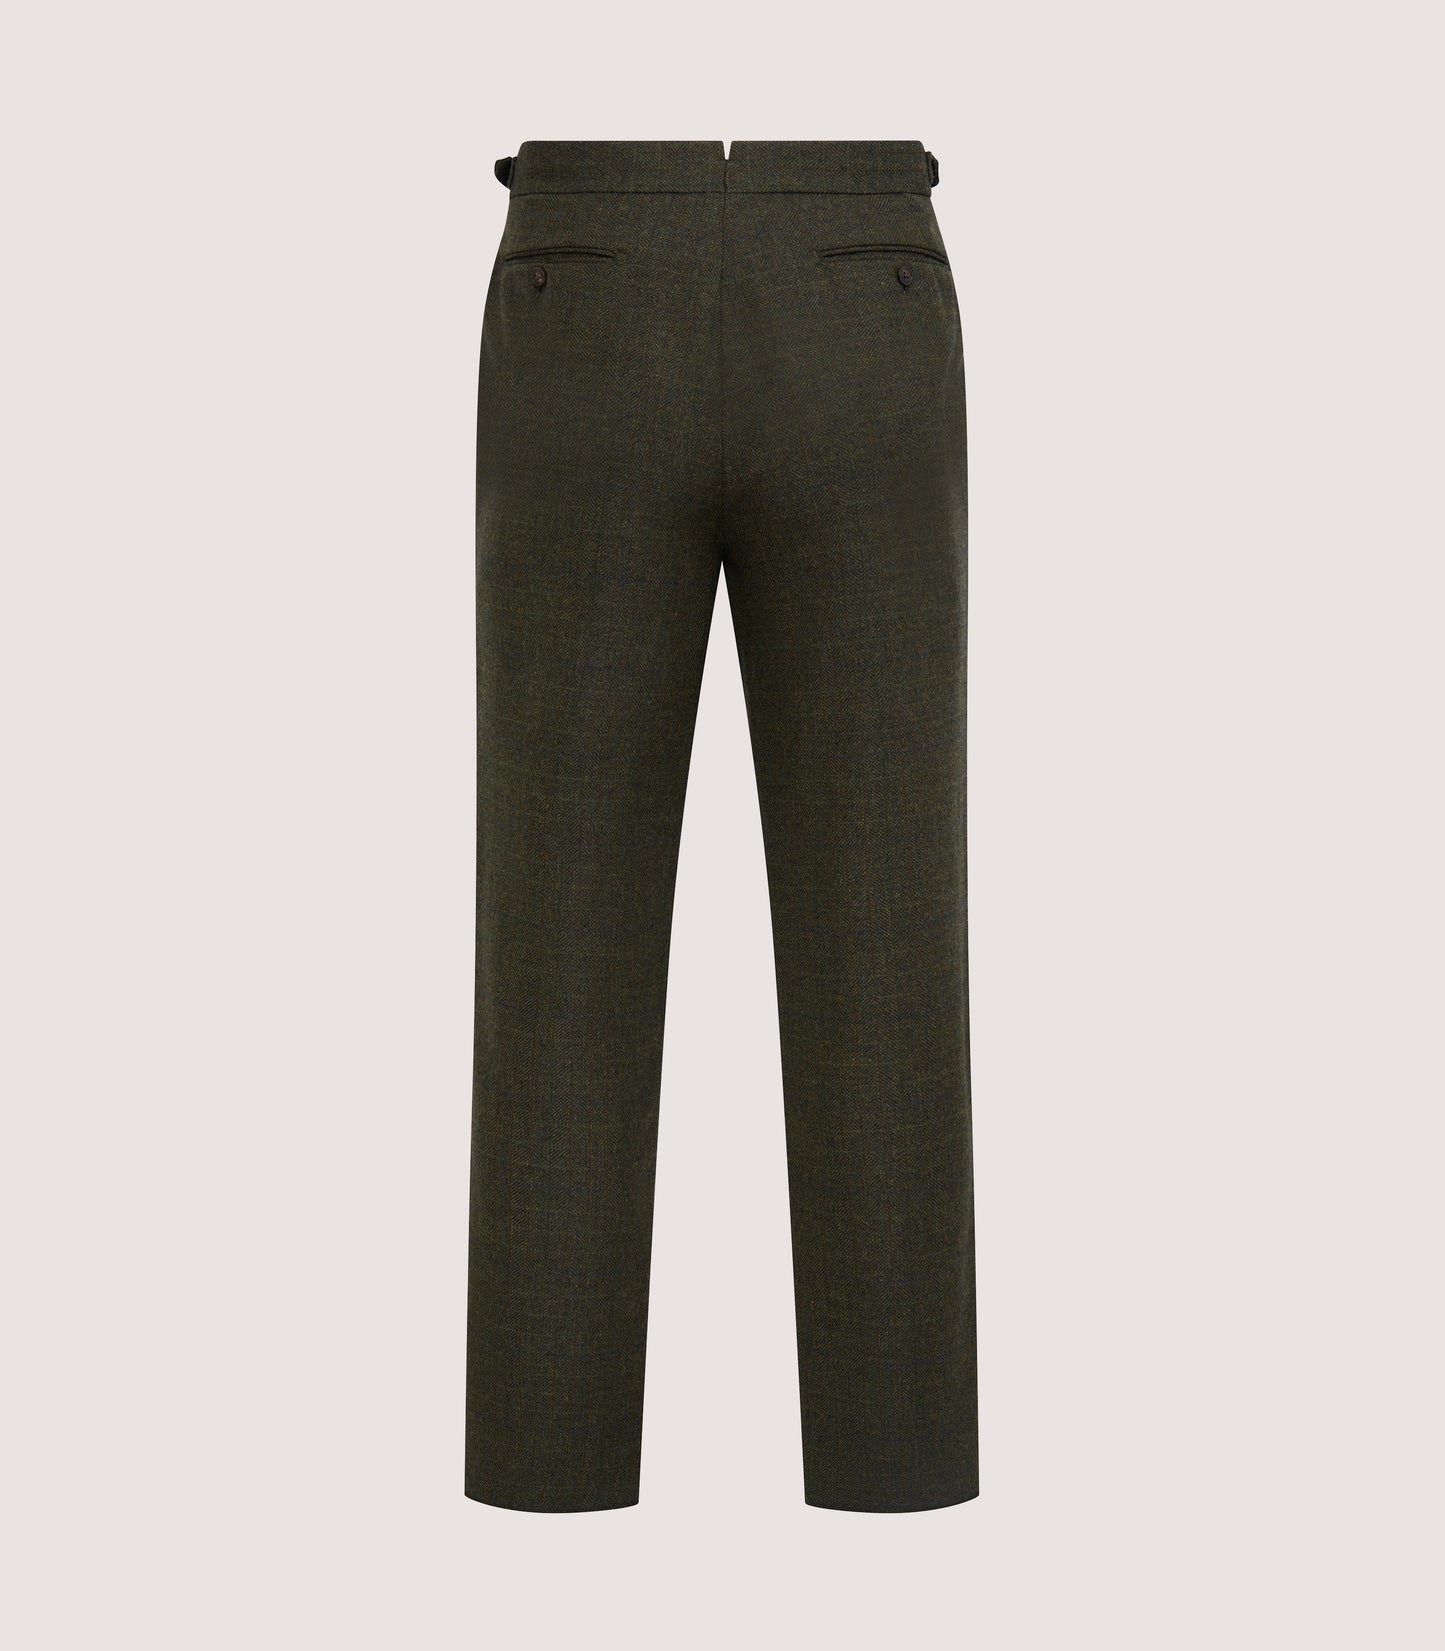 Men's Technical Tweed Two Pleat Sporting Trousers In Strathbeg